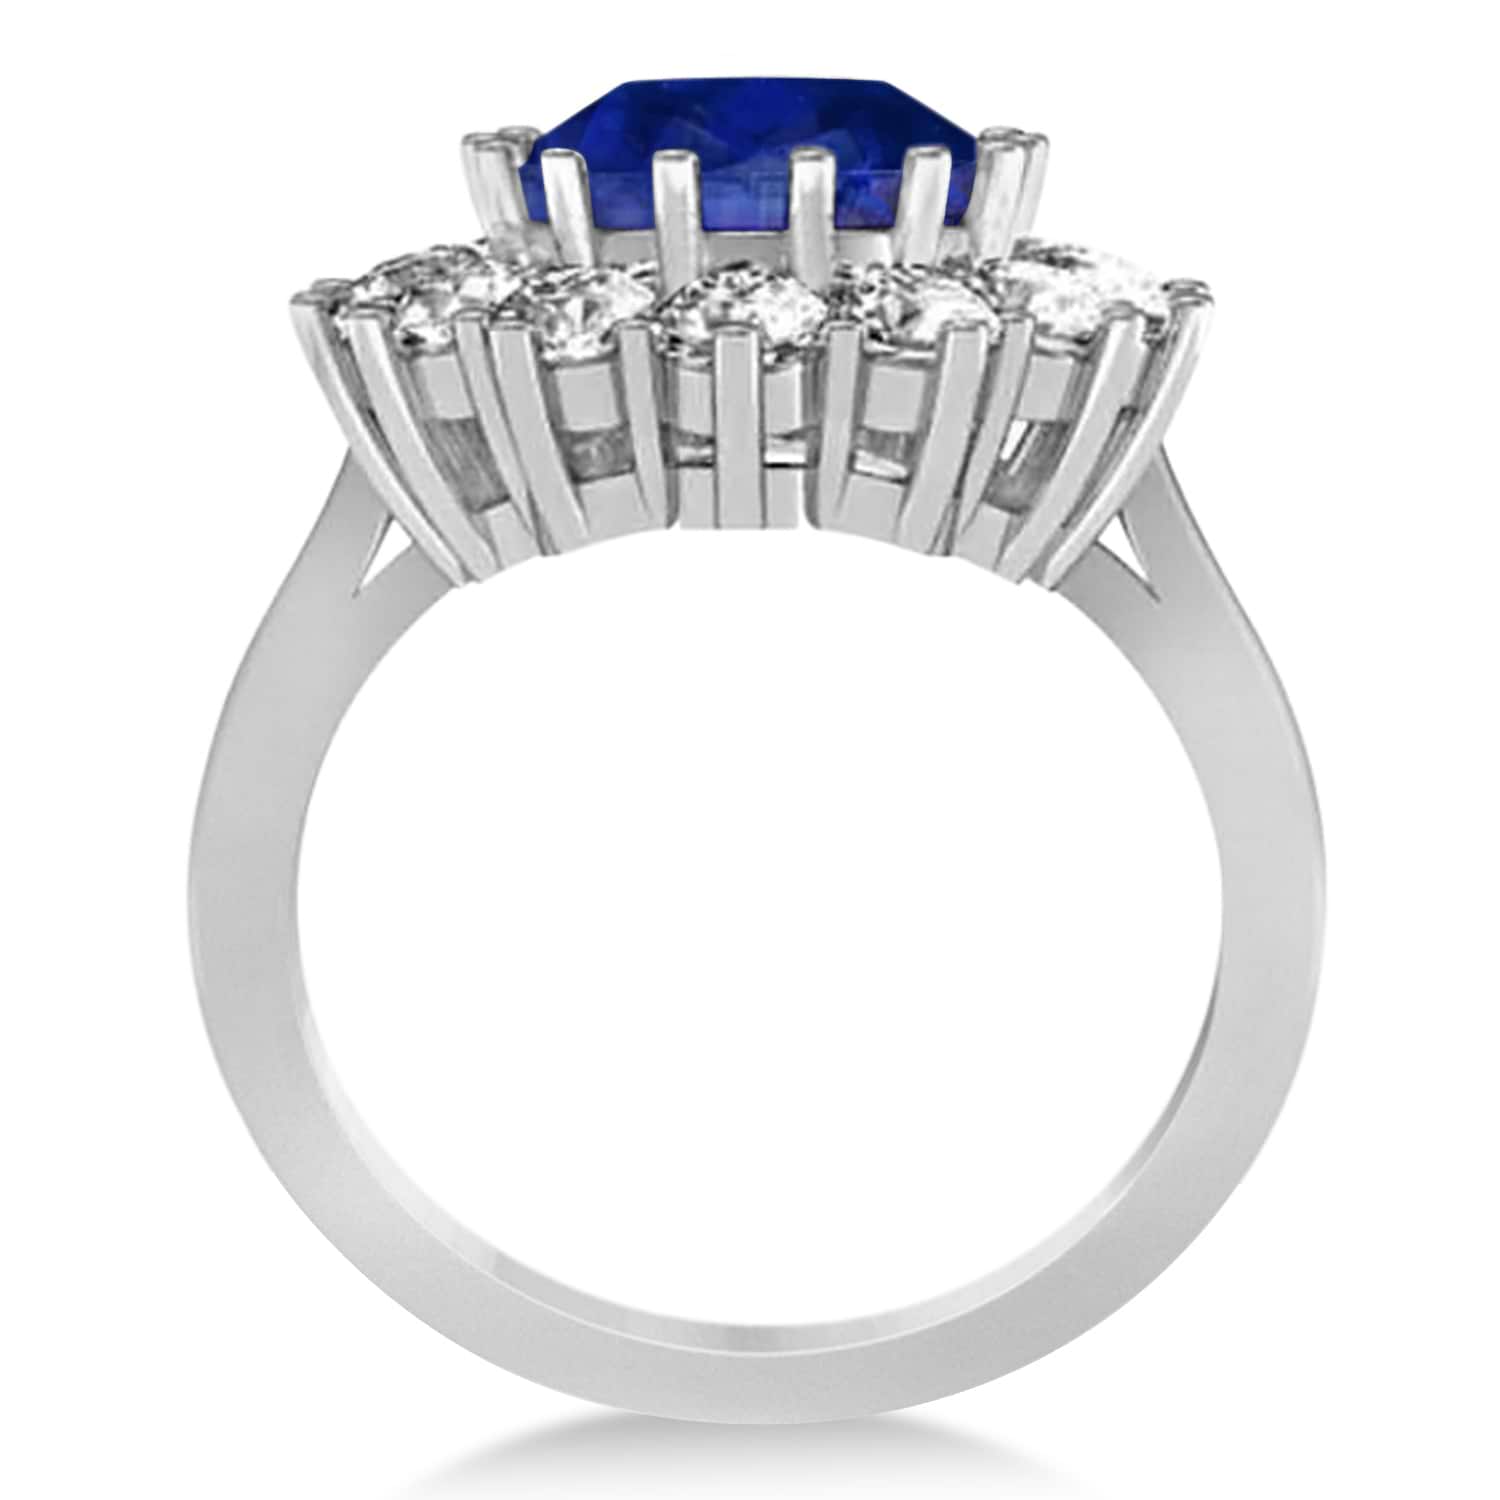 Oval Blue Sapphire & Diamond Accented Ring 18k White Gold (5.40ctw)